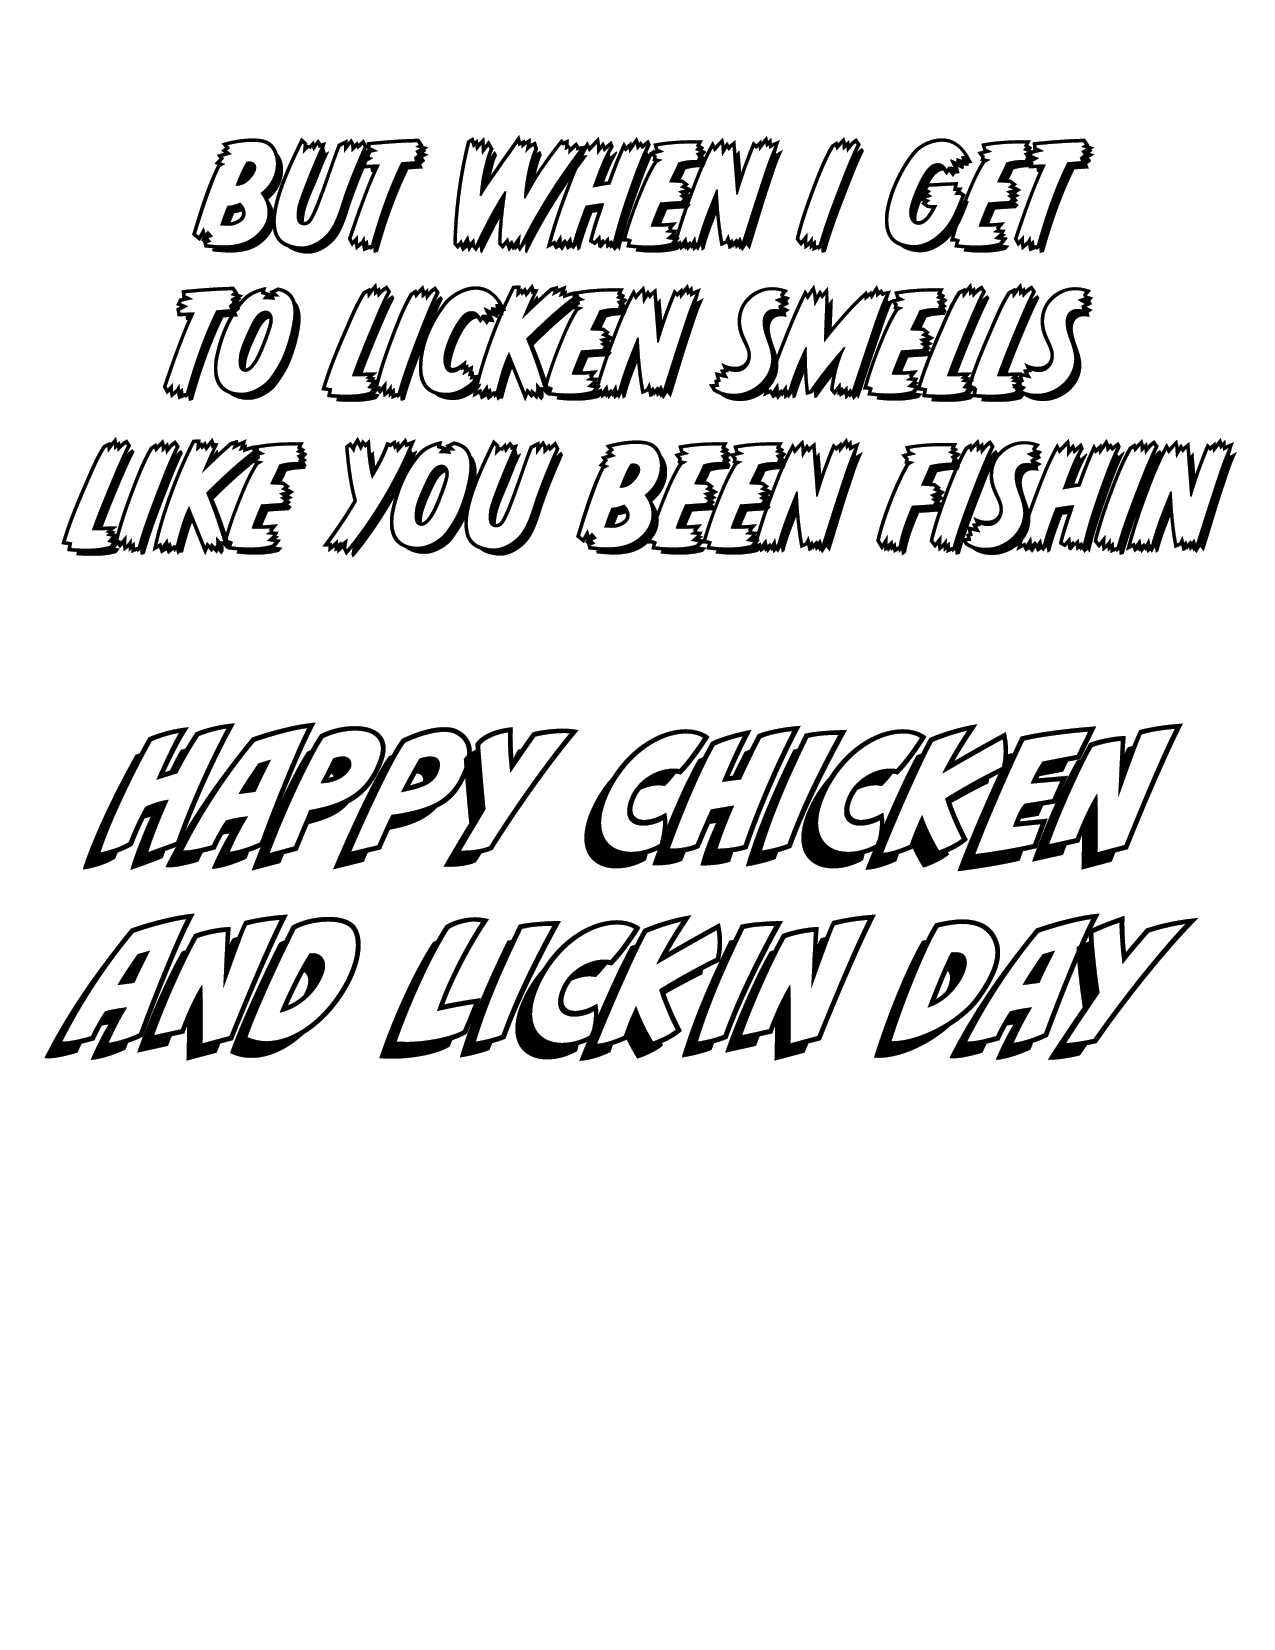 Chicken and a Licken Day Card (March 15)